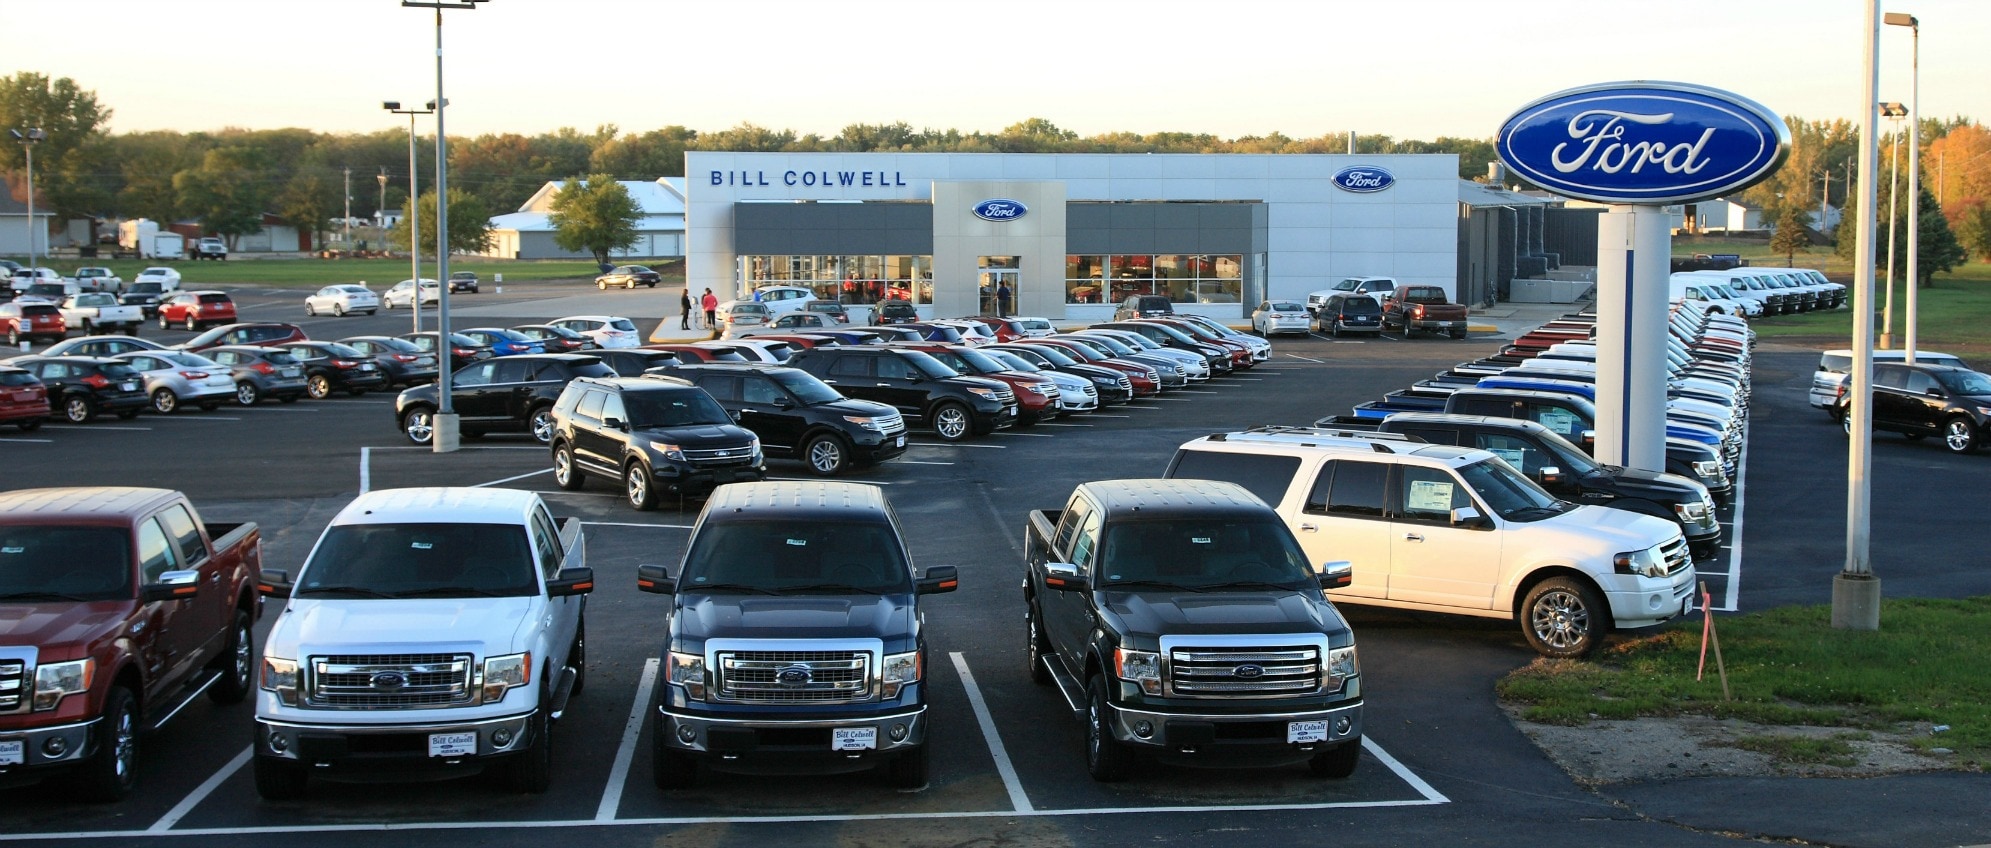 Bill colwell ford hudson ia #5